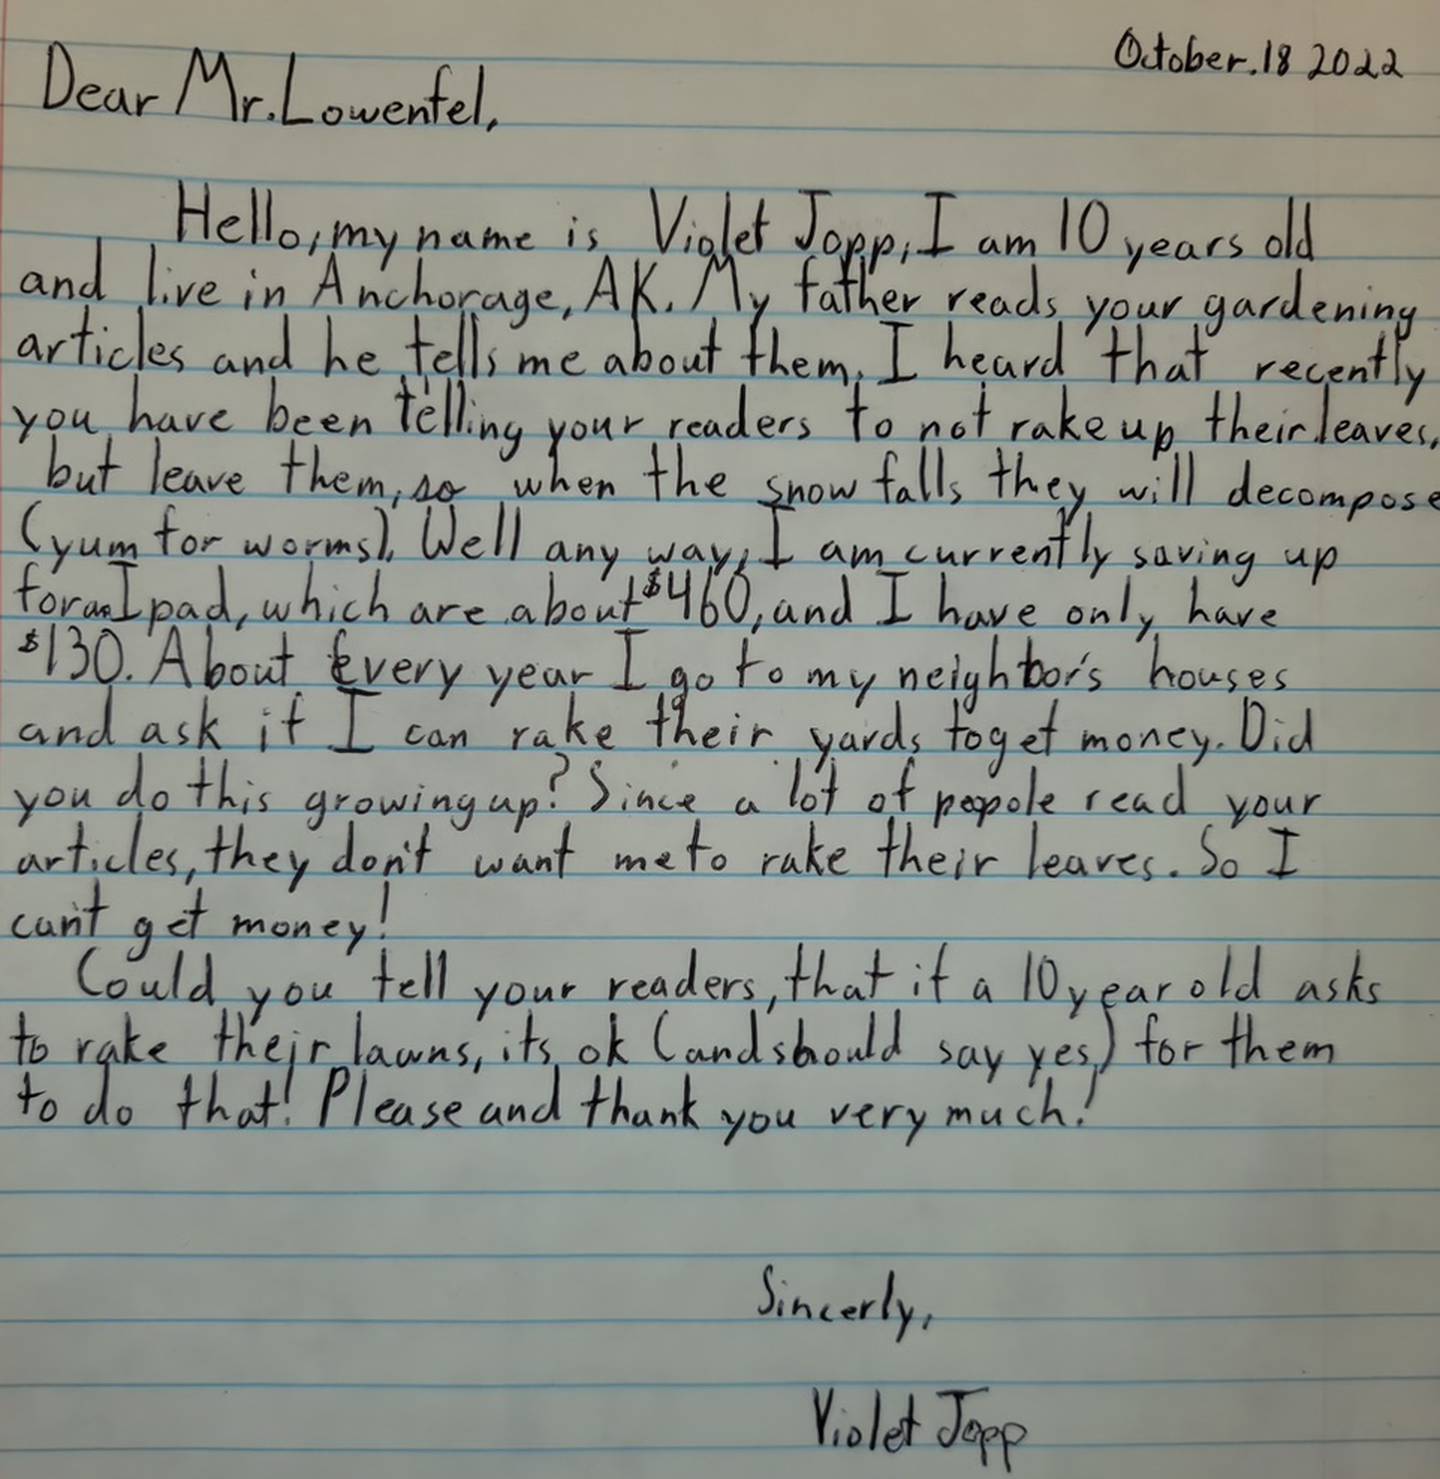 A letter from Anchorage 10-year-old Violet Jopp to gardening columnist Jeff Lowenfels